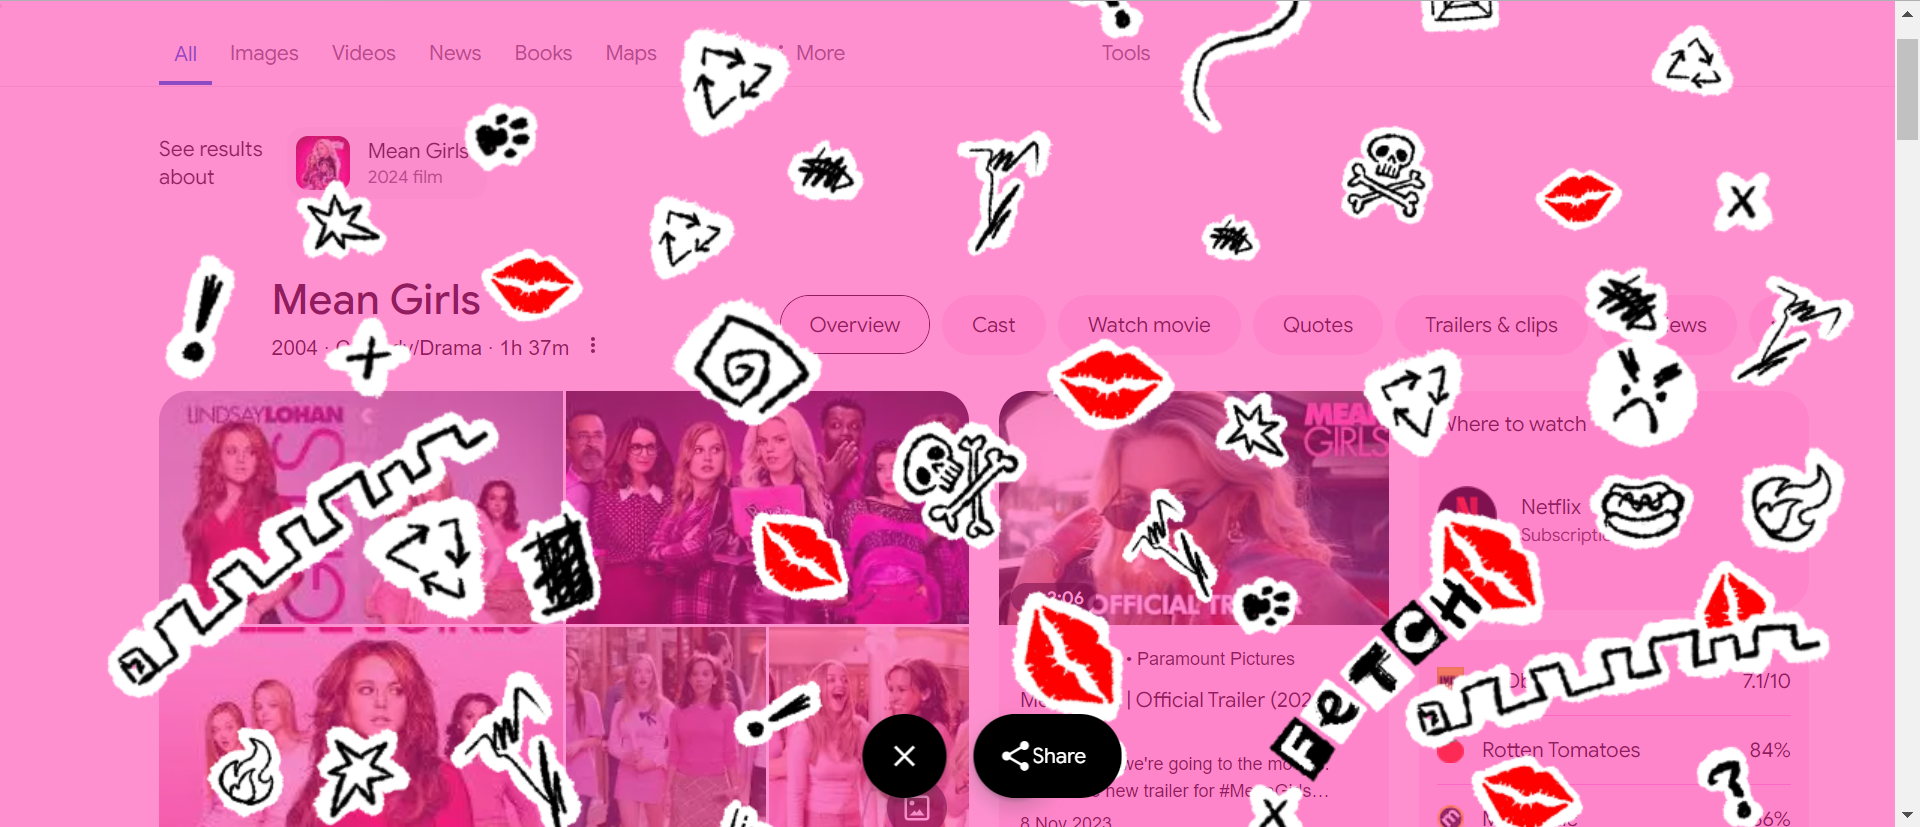 A transparent pink background with kiss and scribble designs on it